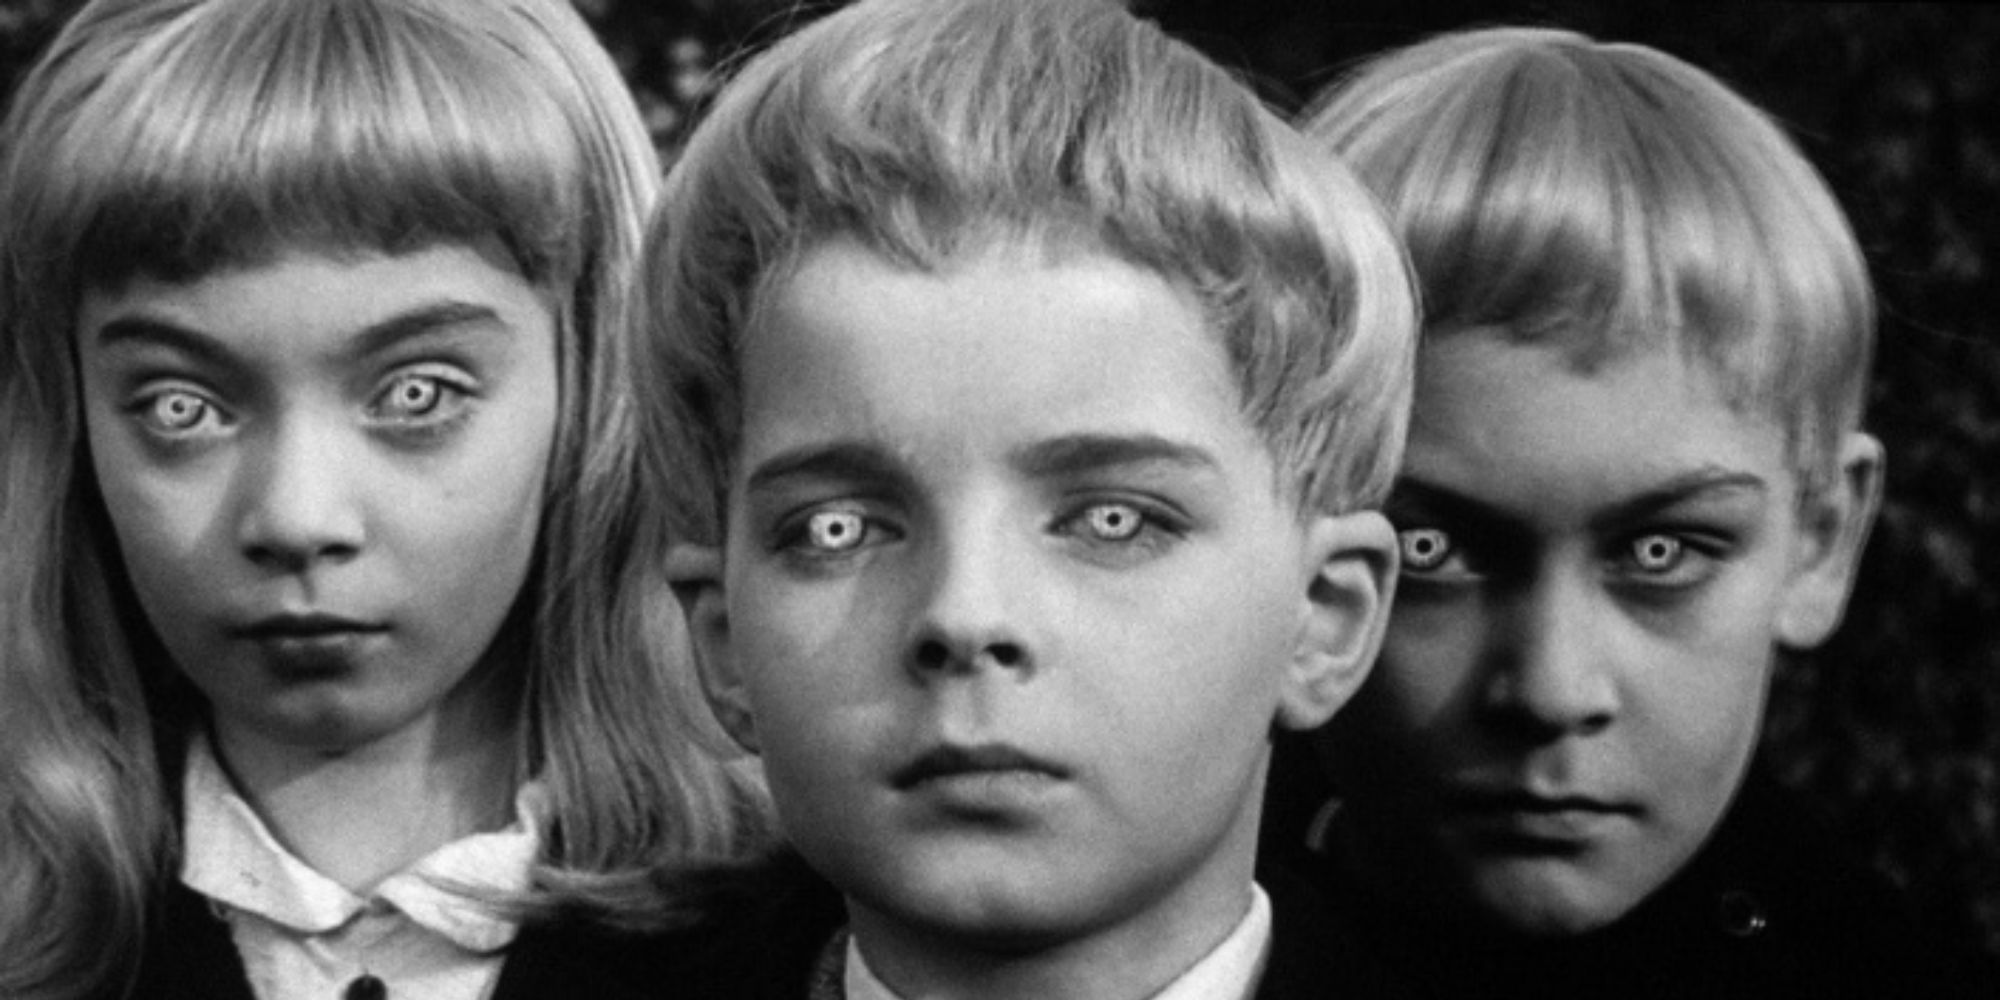 The Village of the Damned - three of the alien children